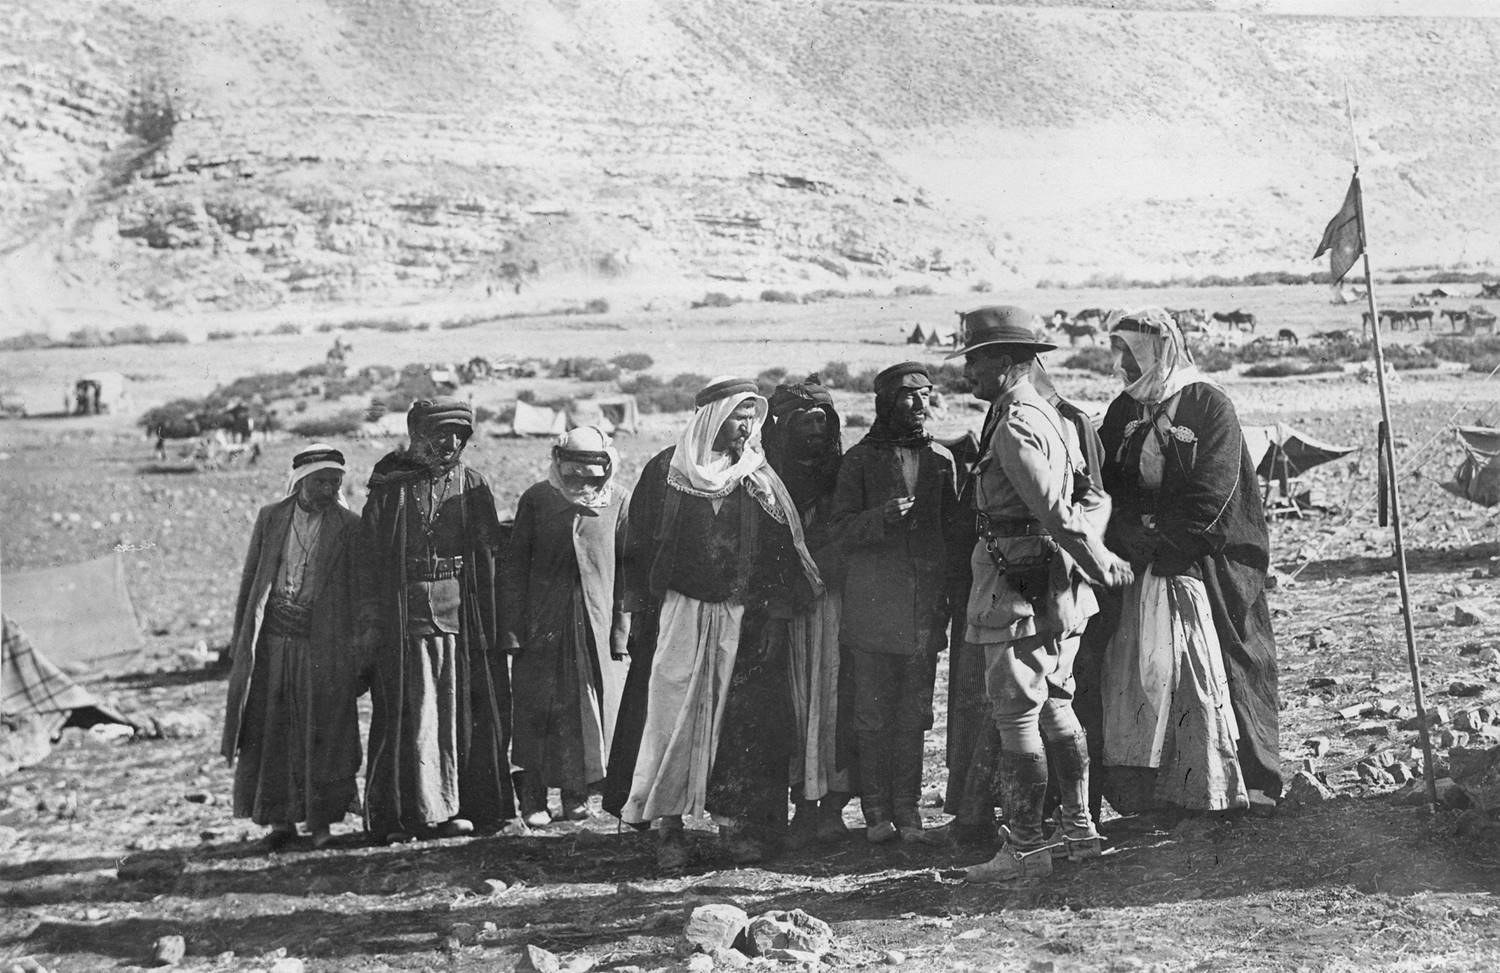 Australian solider talking with a group of Arabs in Palestine, 1918. [Photo with permission from State Library of South Australia, PRG280/1/15/1072.]